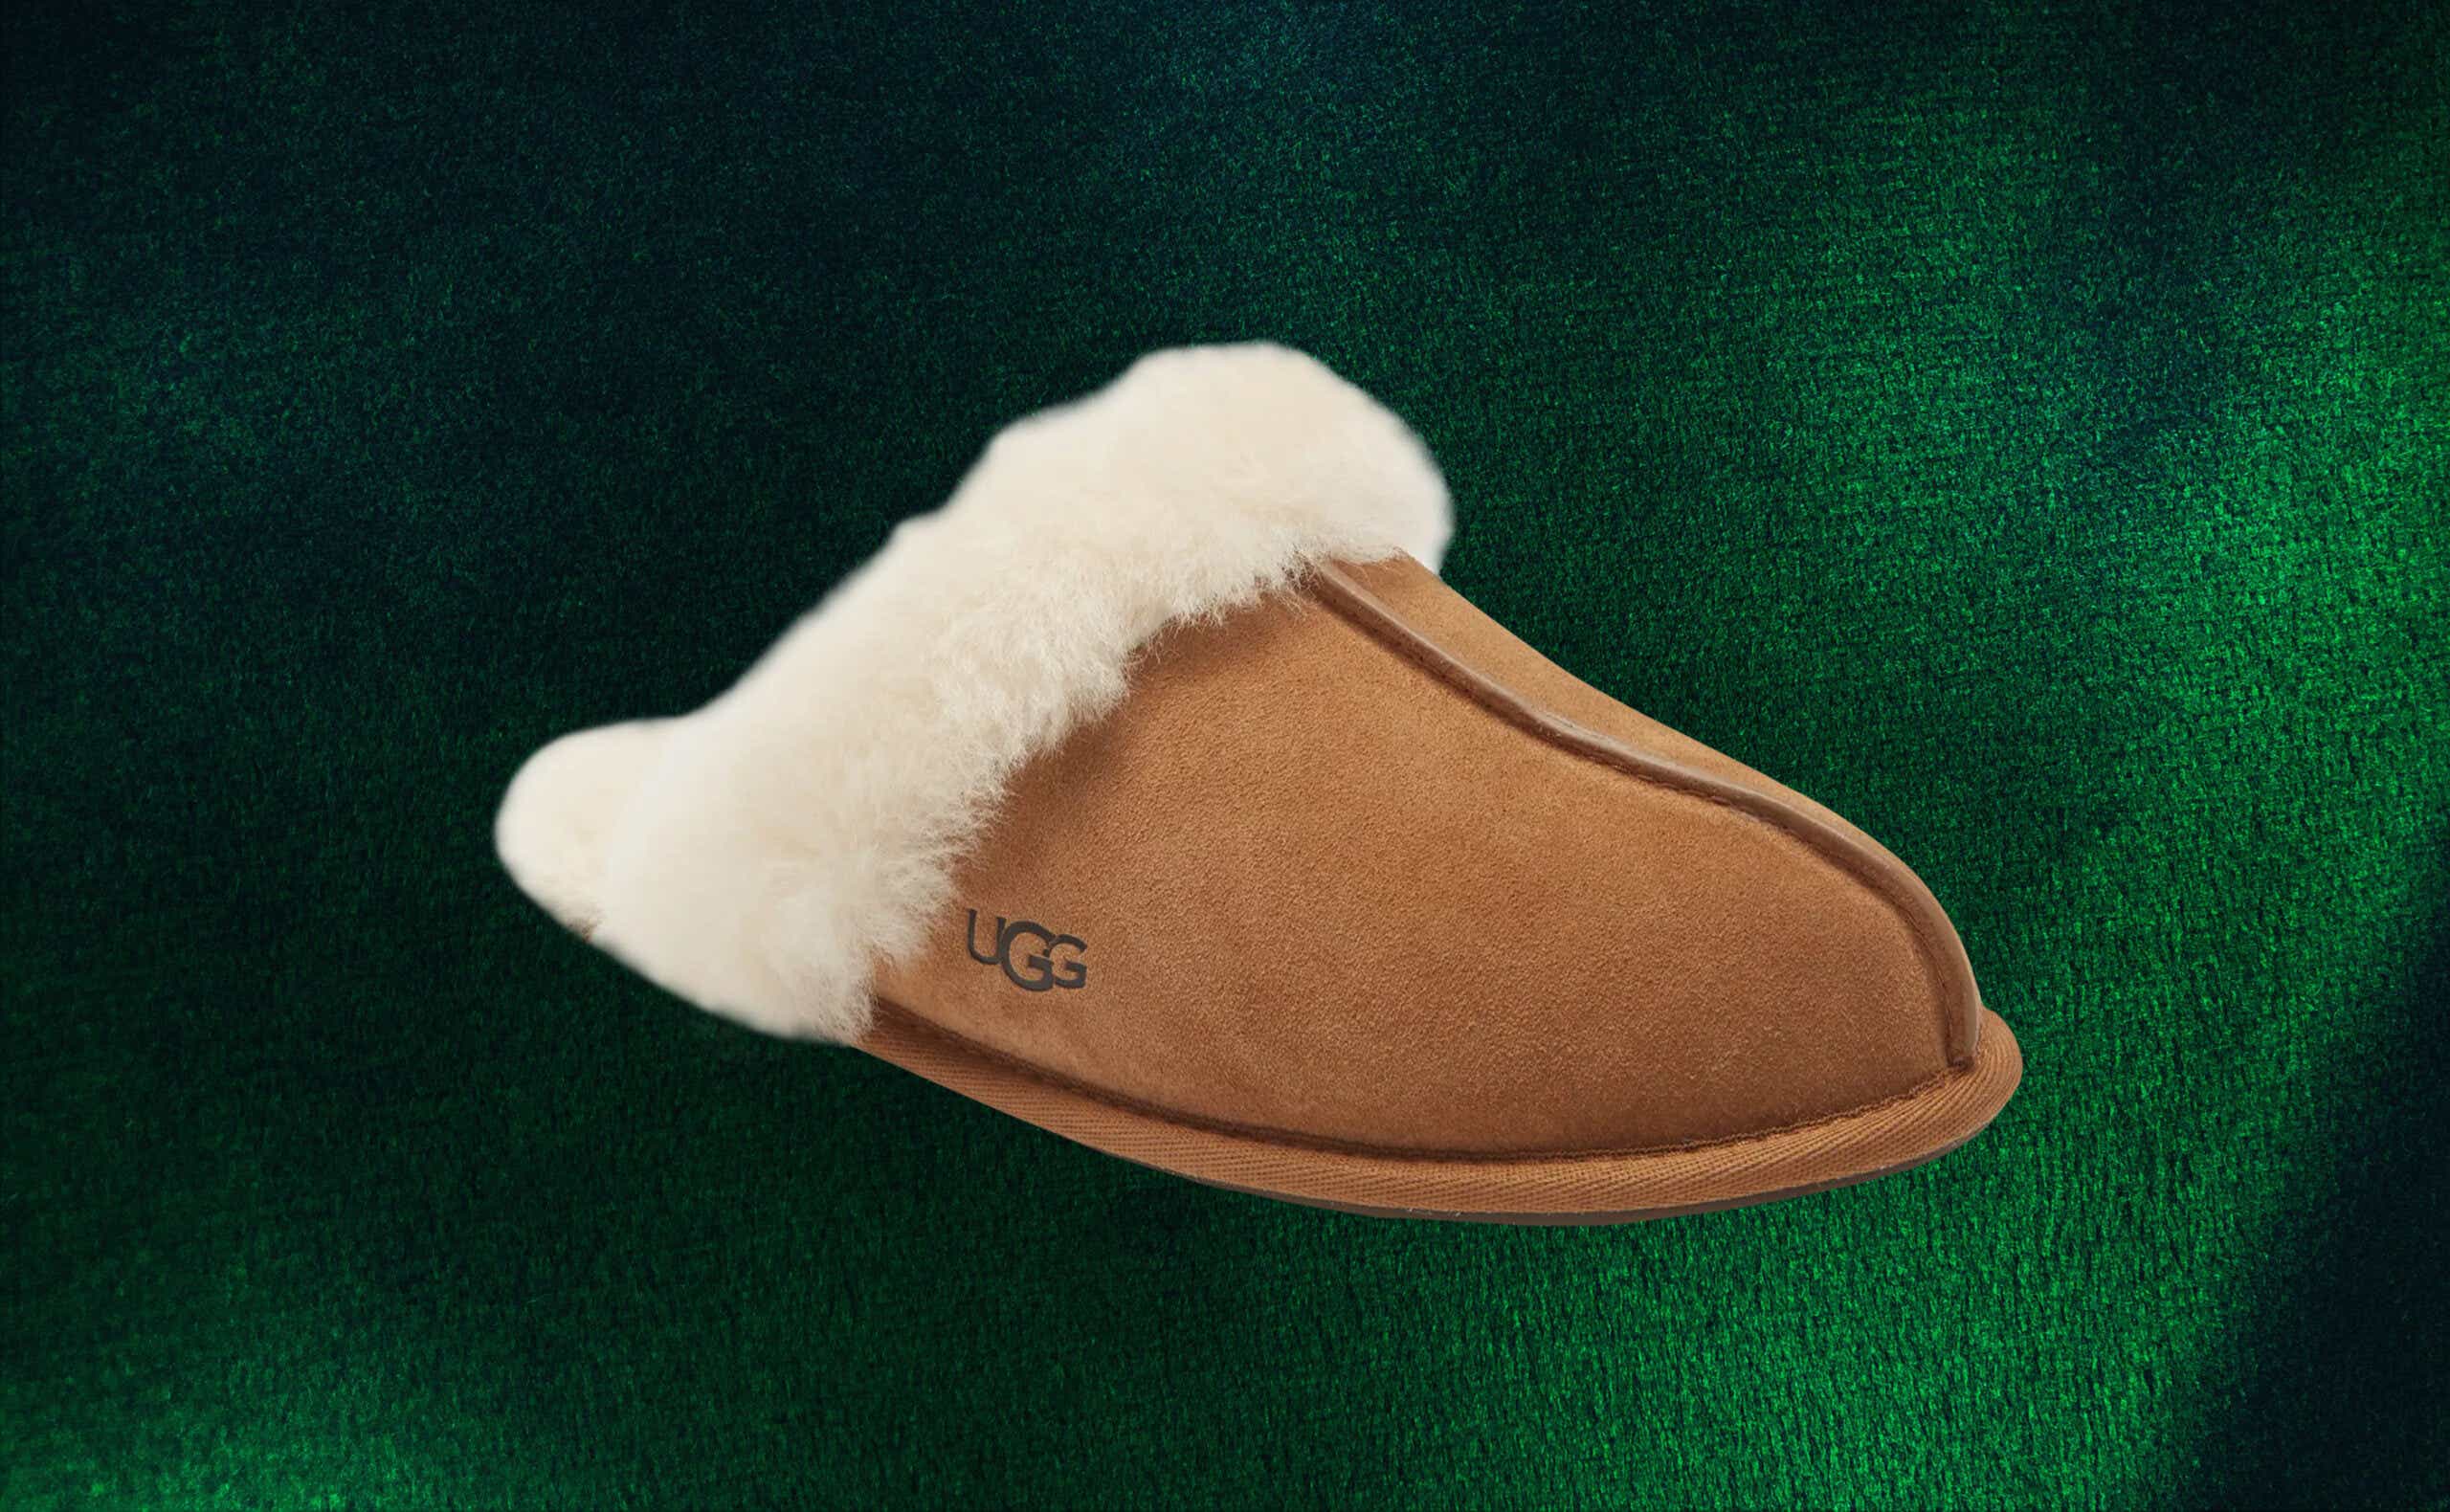 UGG Slippers (100+ products) compare now & find price »